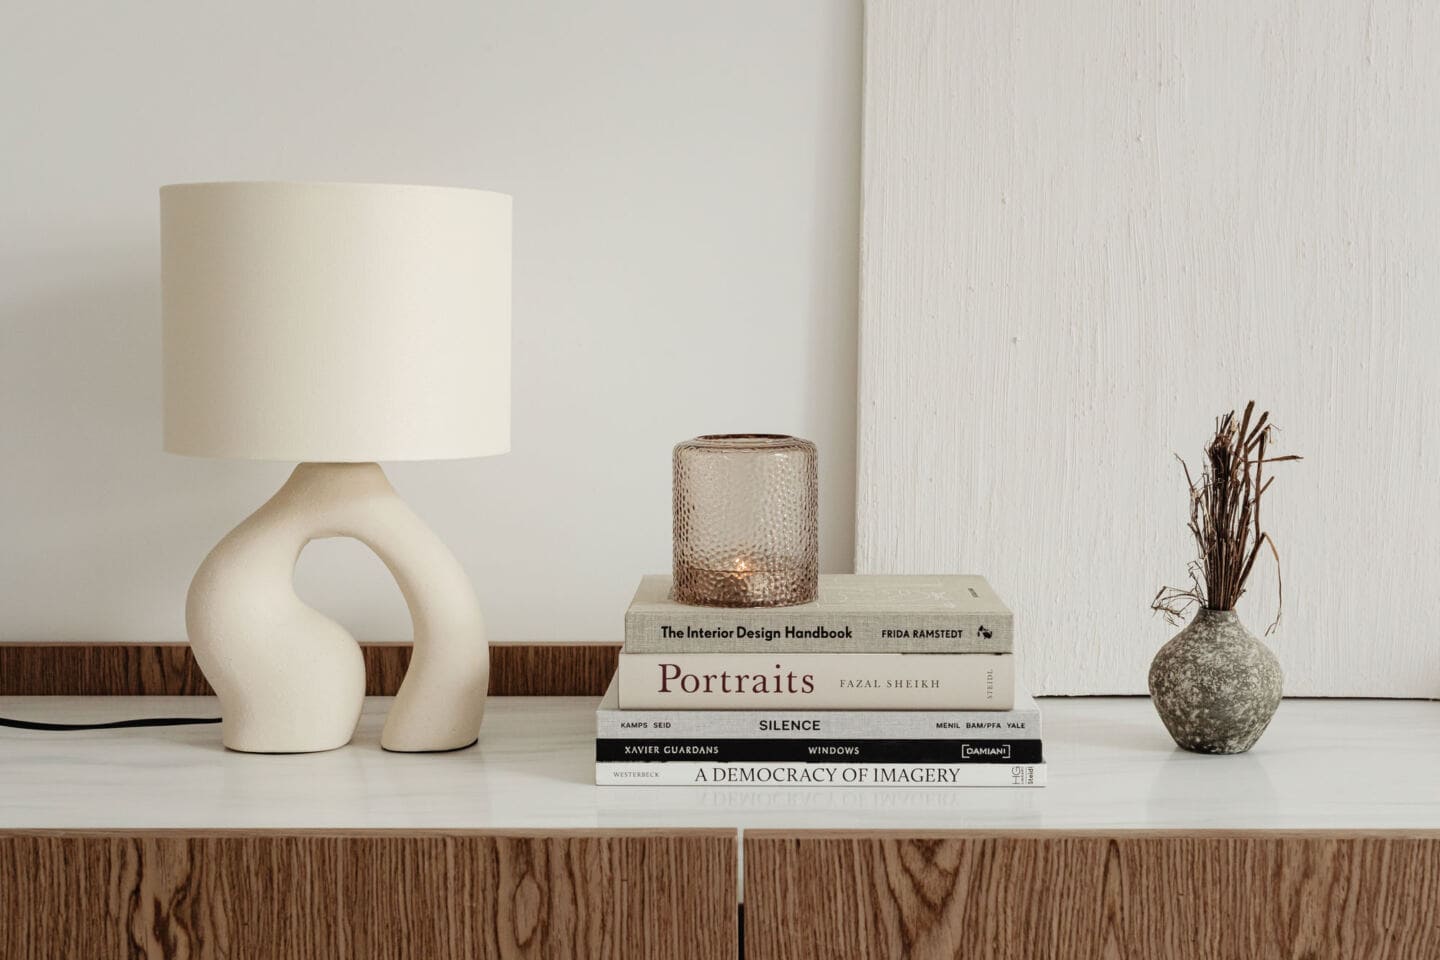 An organic shaped lamp in a sideboard next to a pile of books and some dried twigs in a small vase 